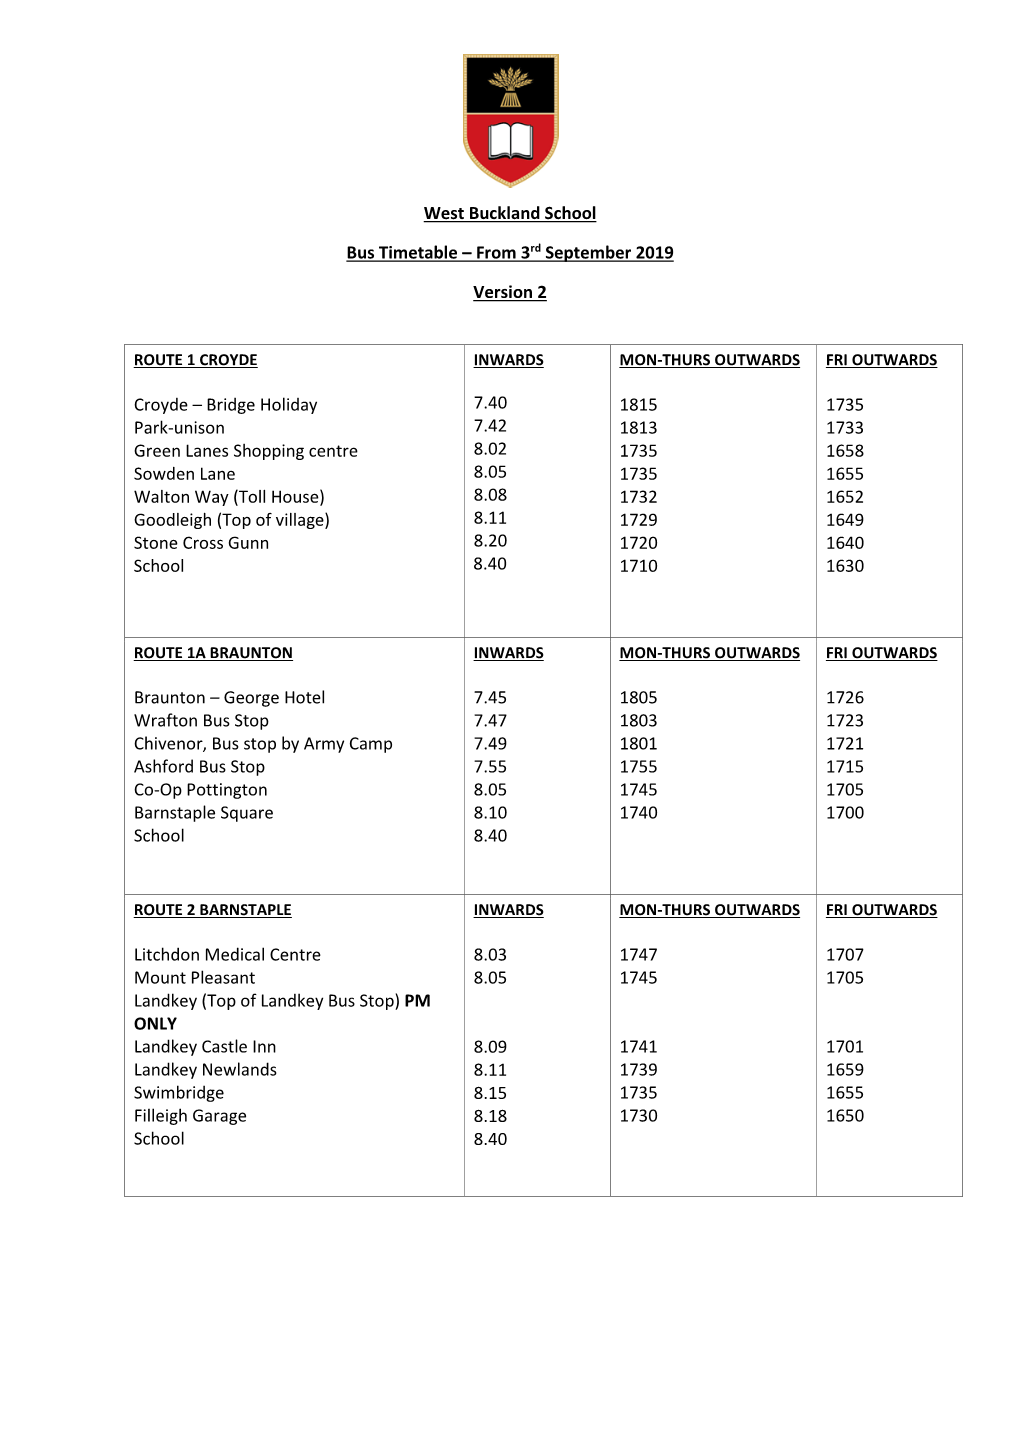 West Buckland School Bus Timetable – from 3Rd September 2019